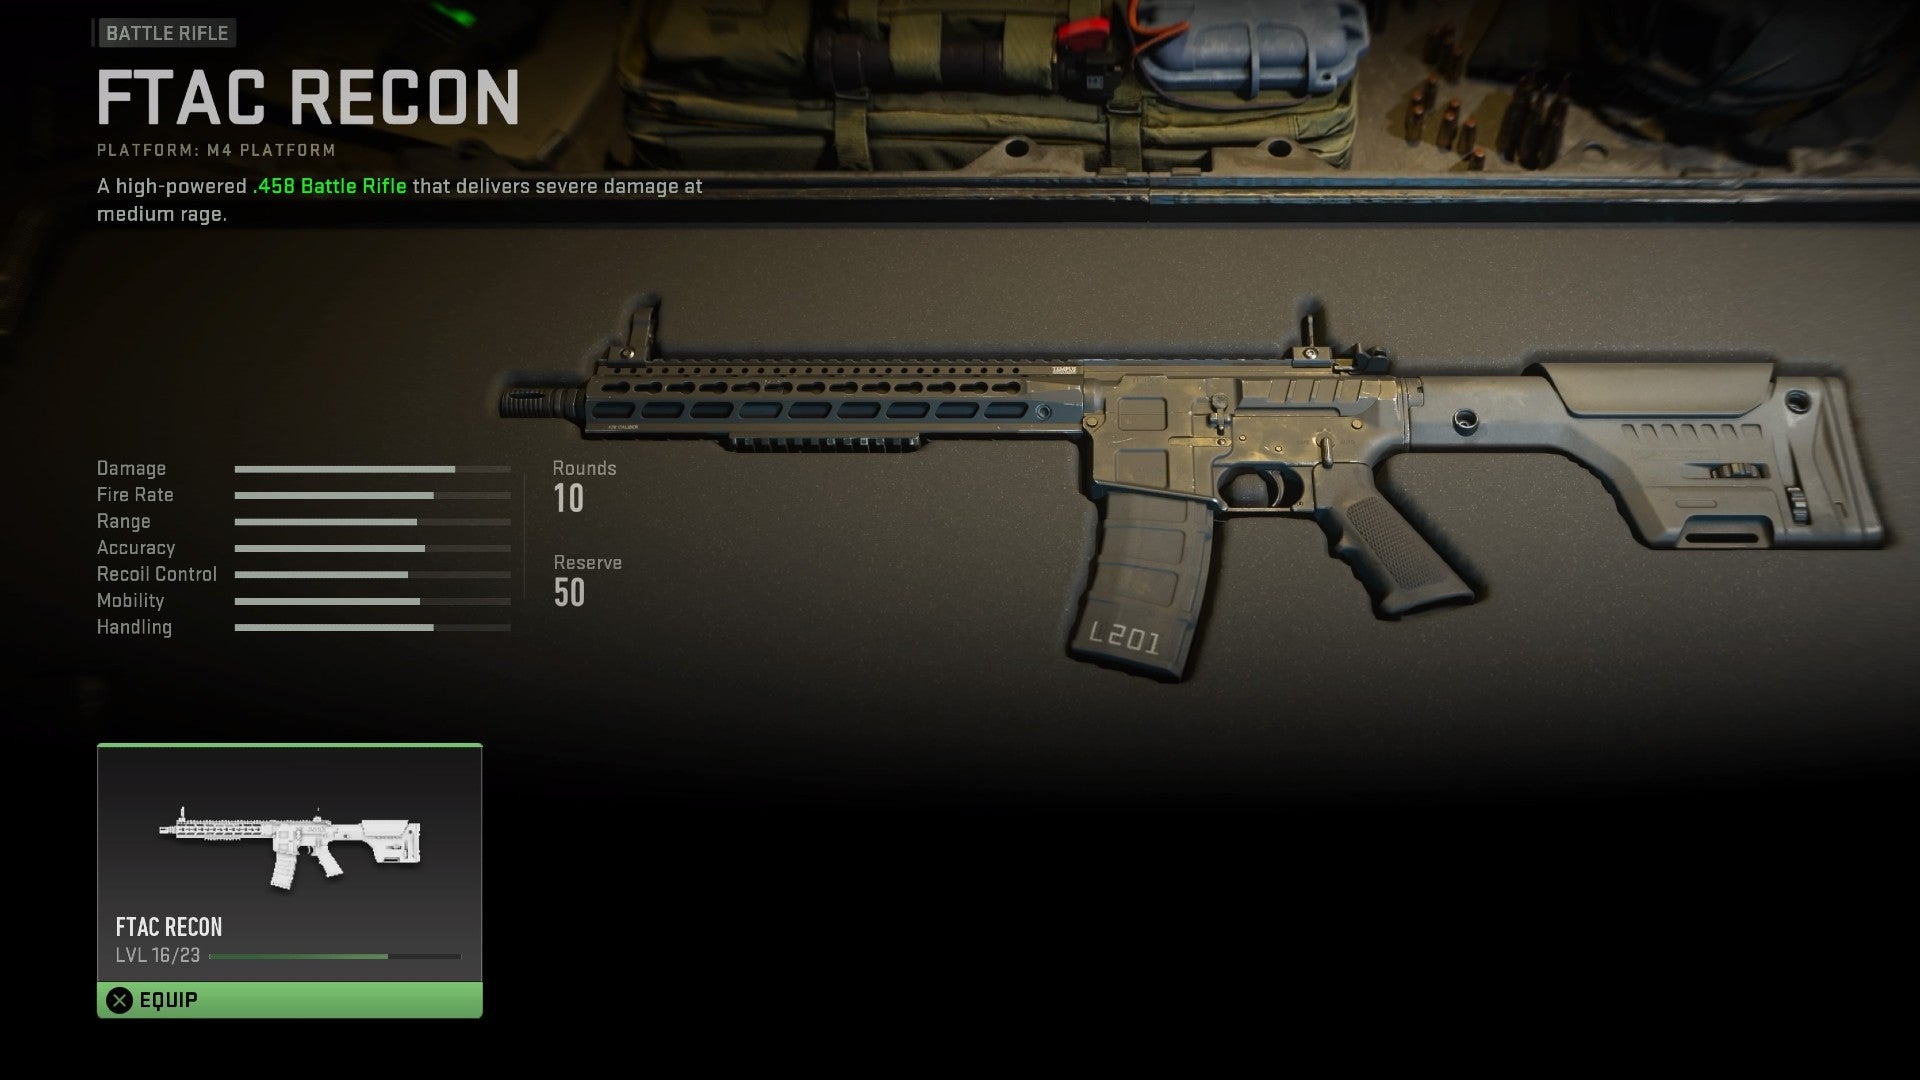 Modern Warfare 2 beta screenshot showing the FTAC Recon in a weapon container, with the stats on the left.